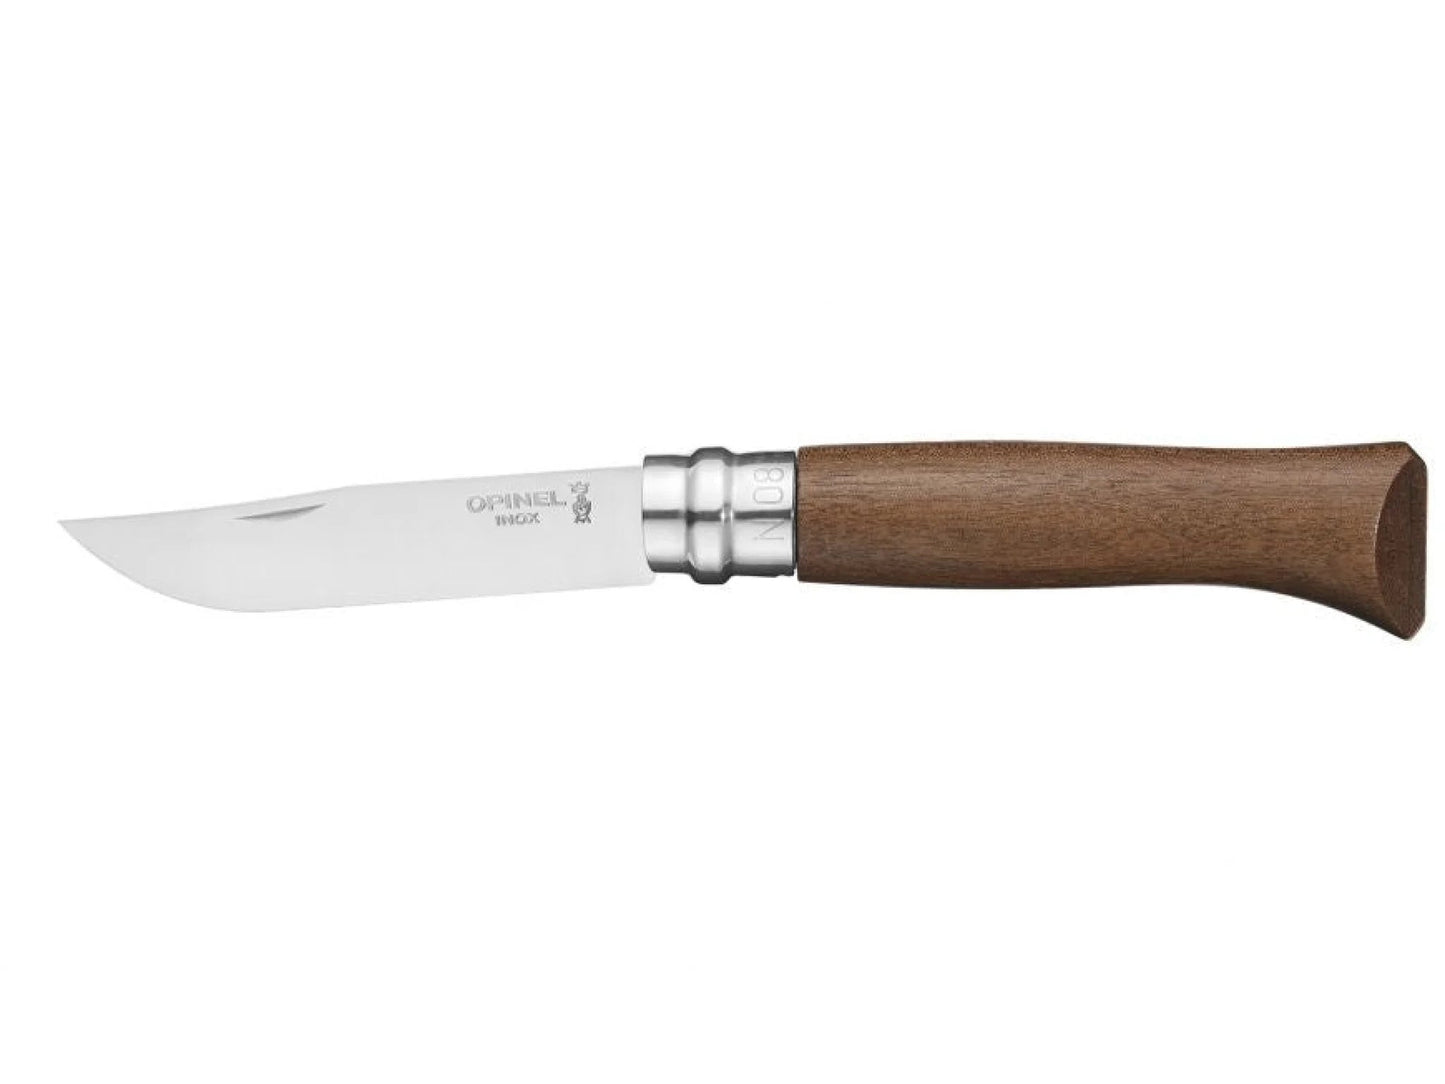 Couteau N08 - Inox - Noyer - Opinel